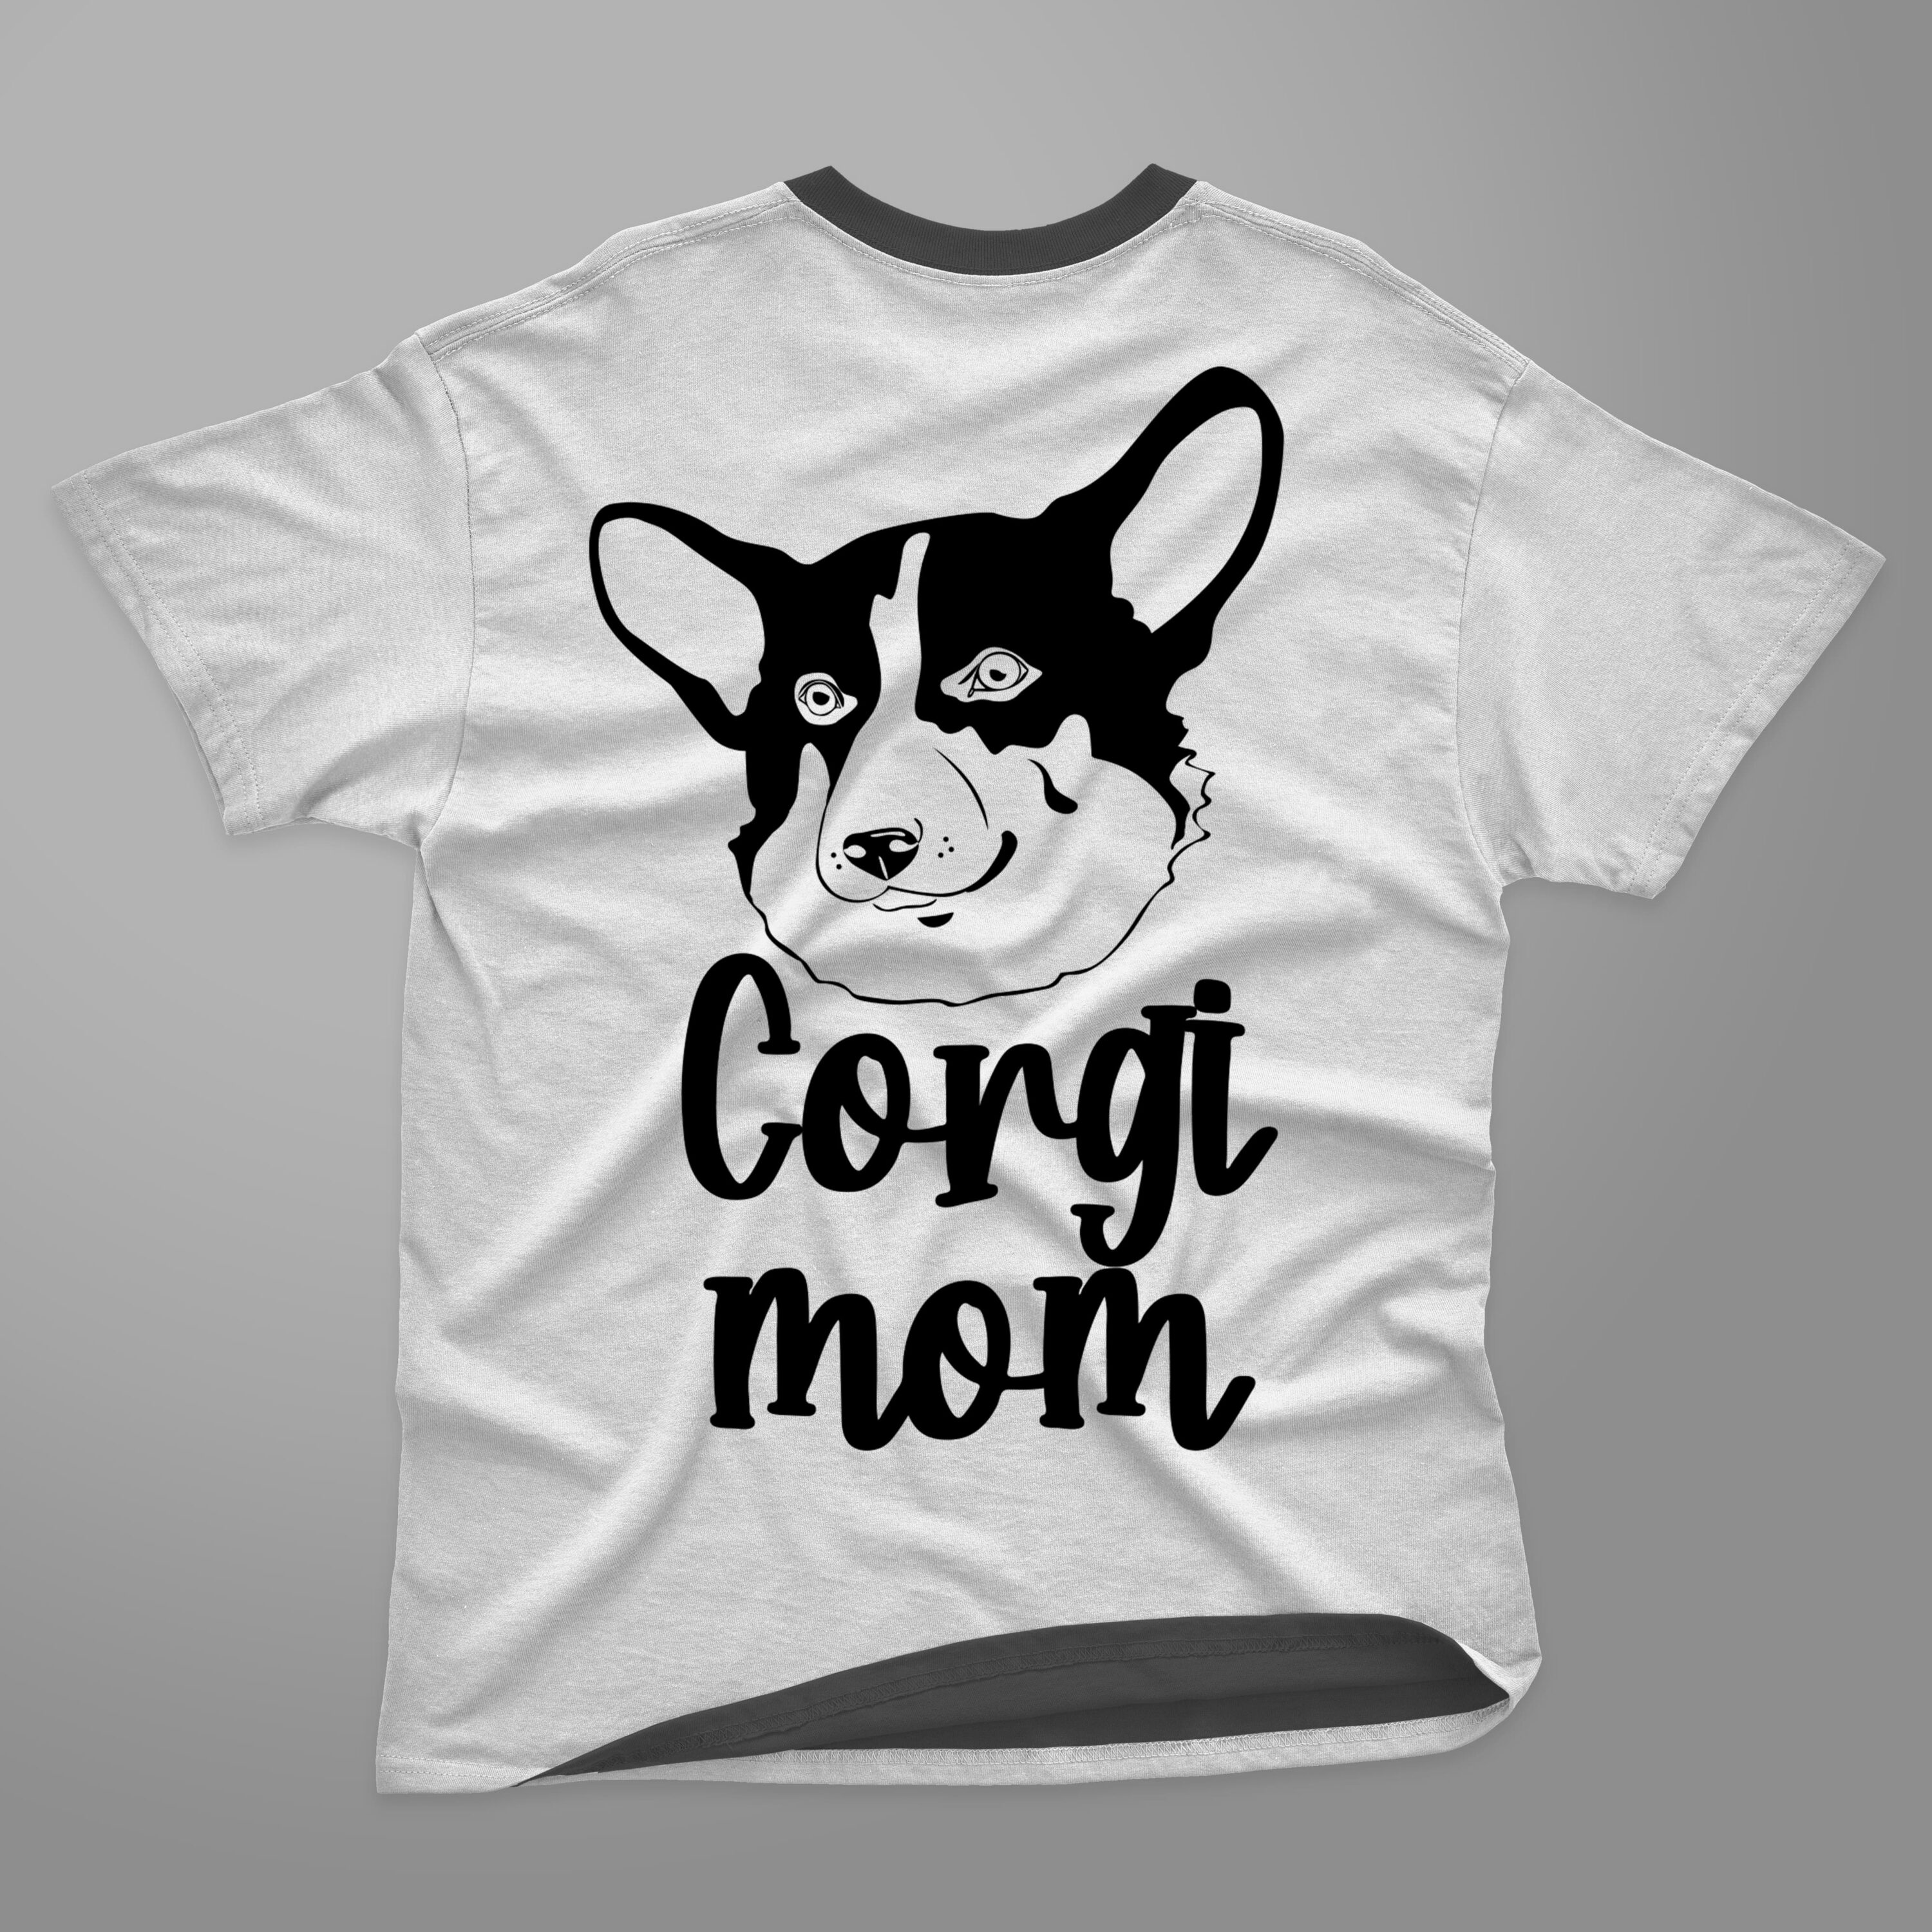 Funny corgi face with lettering.